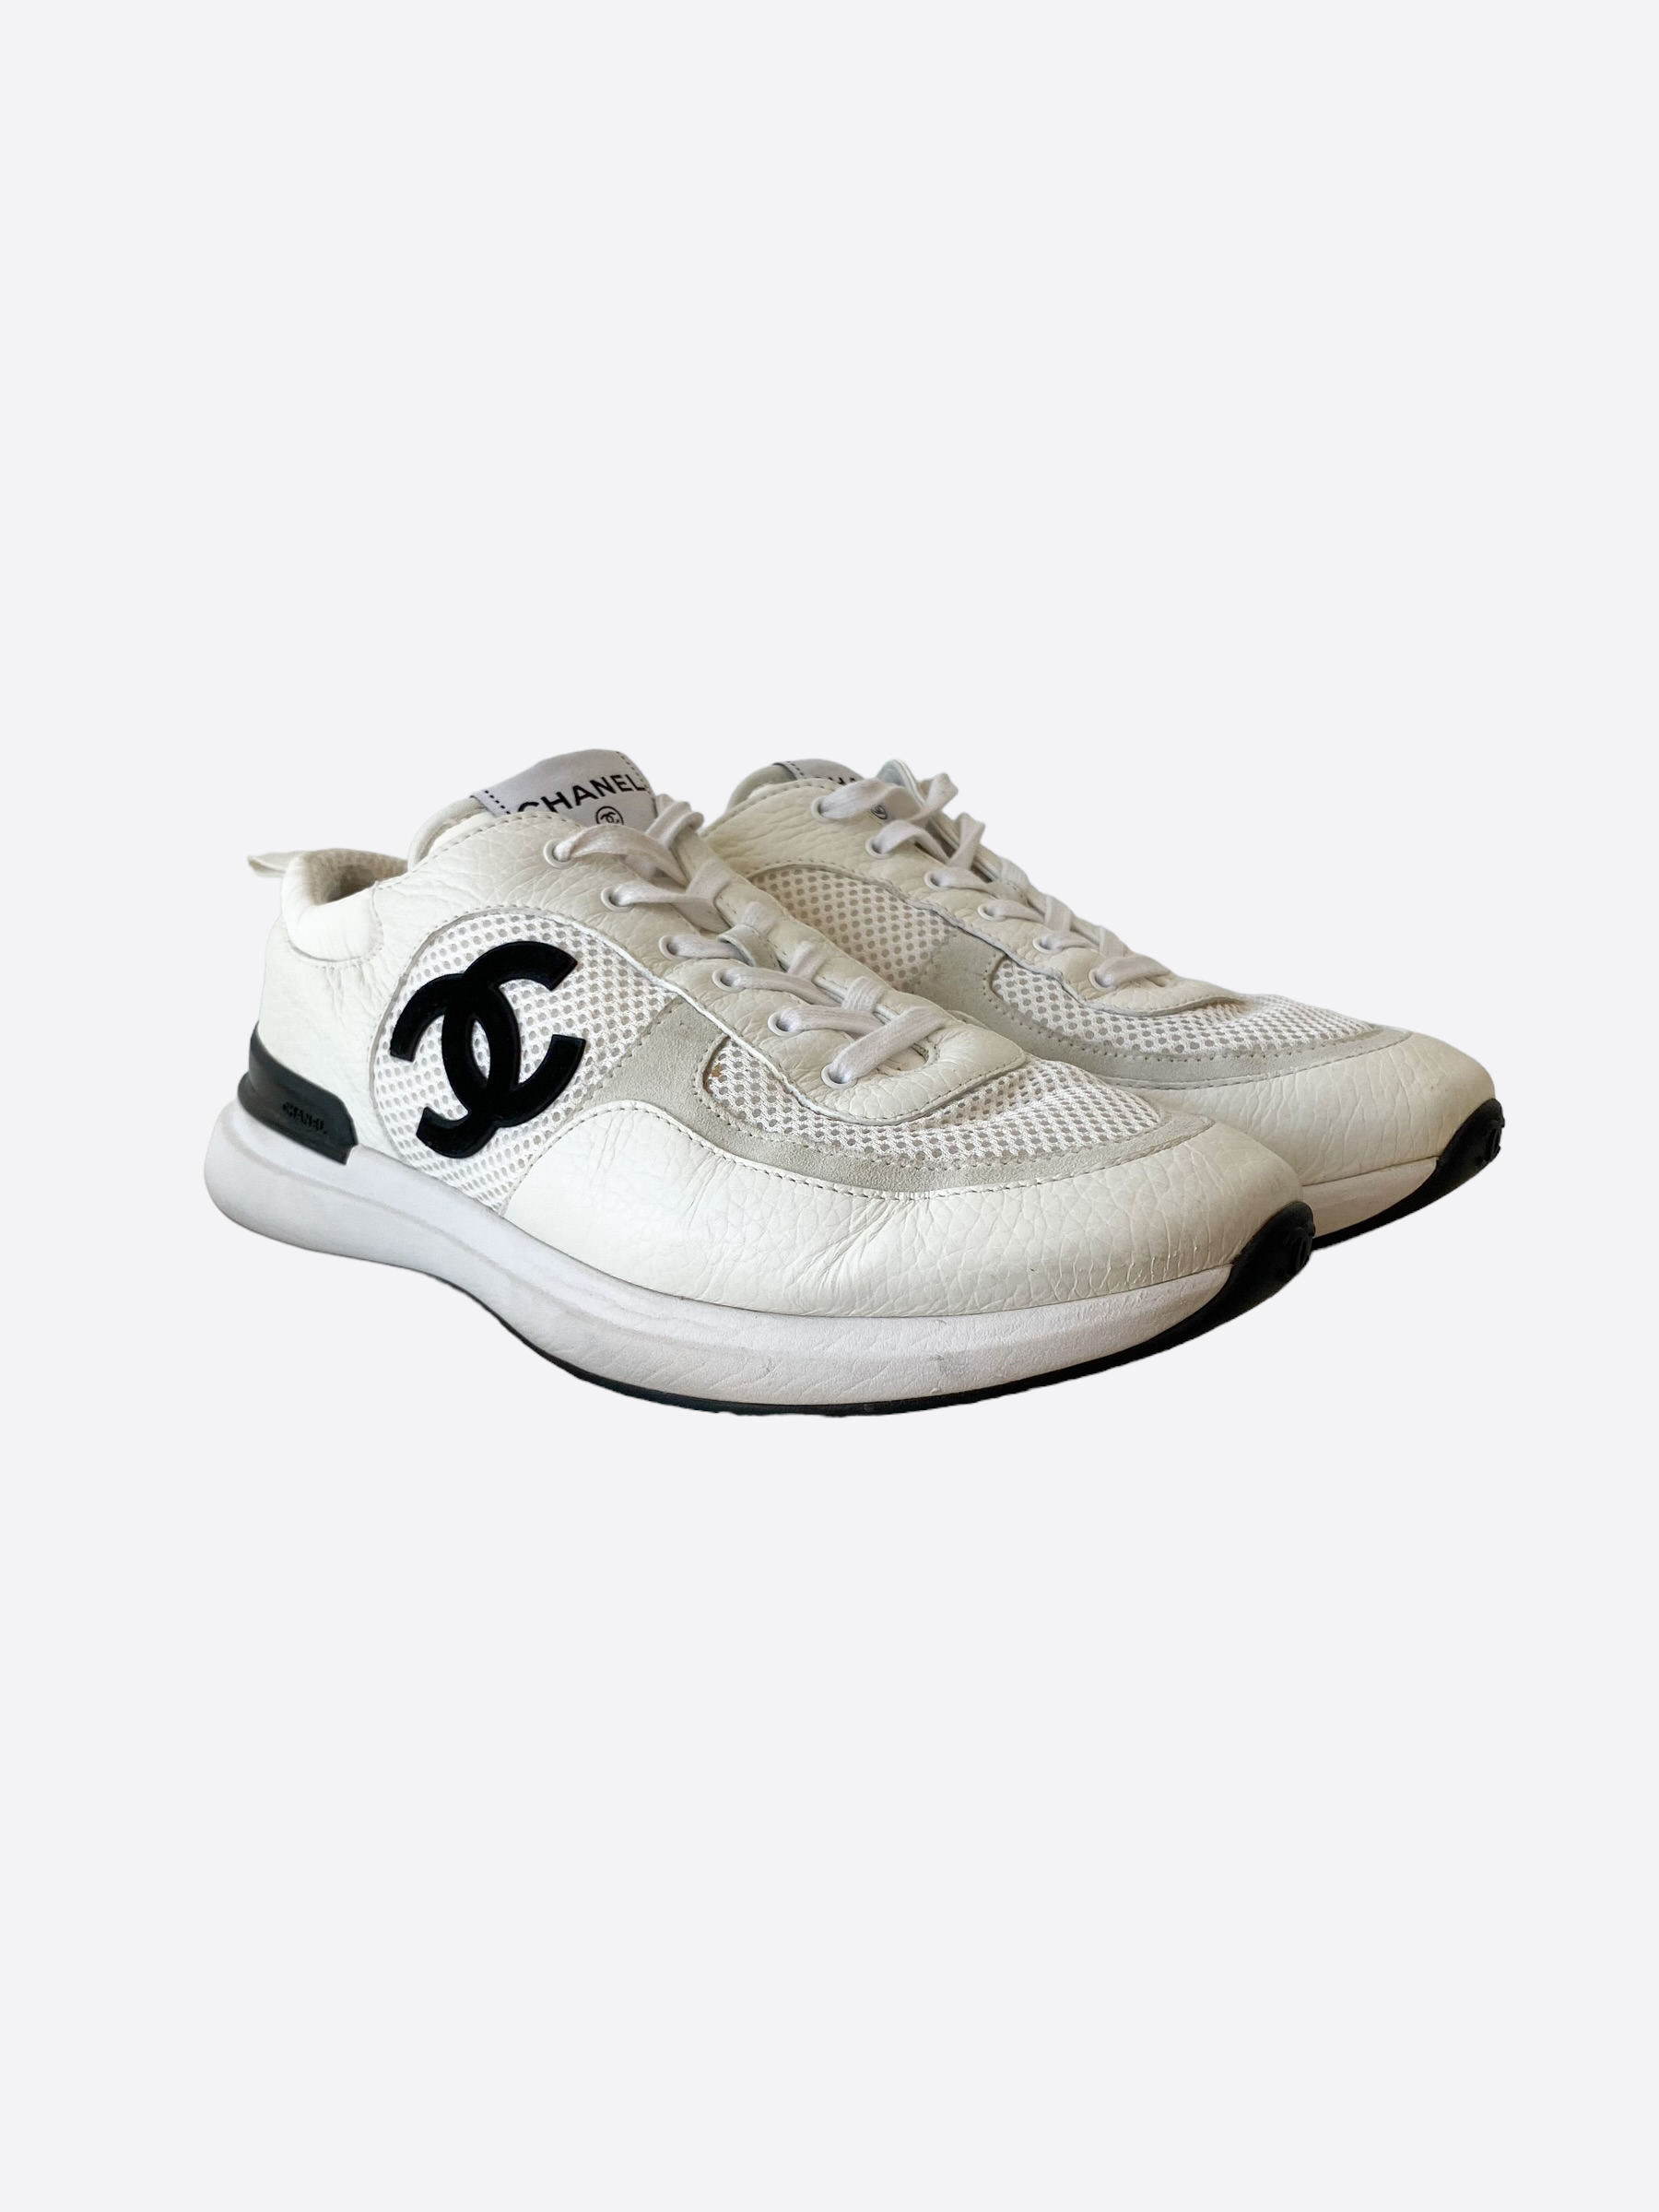 CHANEL Sneaker White Leather Suede Black CC Mesh Fabric Lace-Up Sz 38 2022